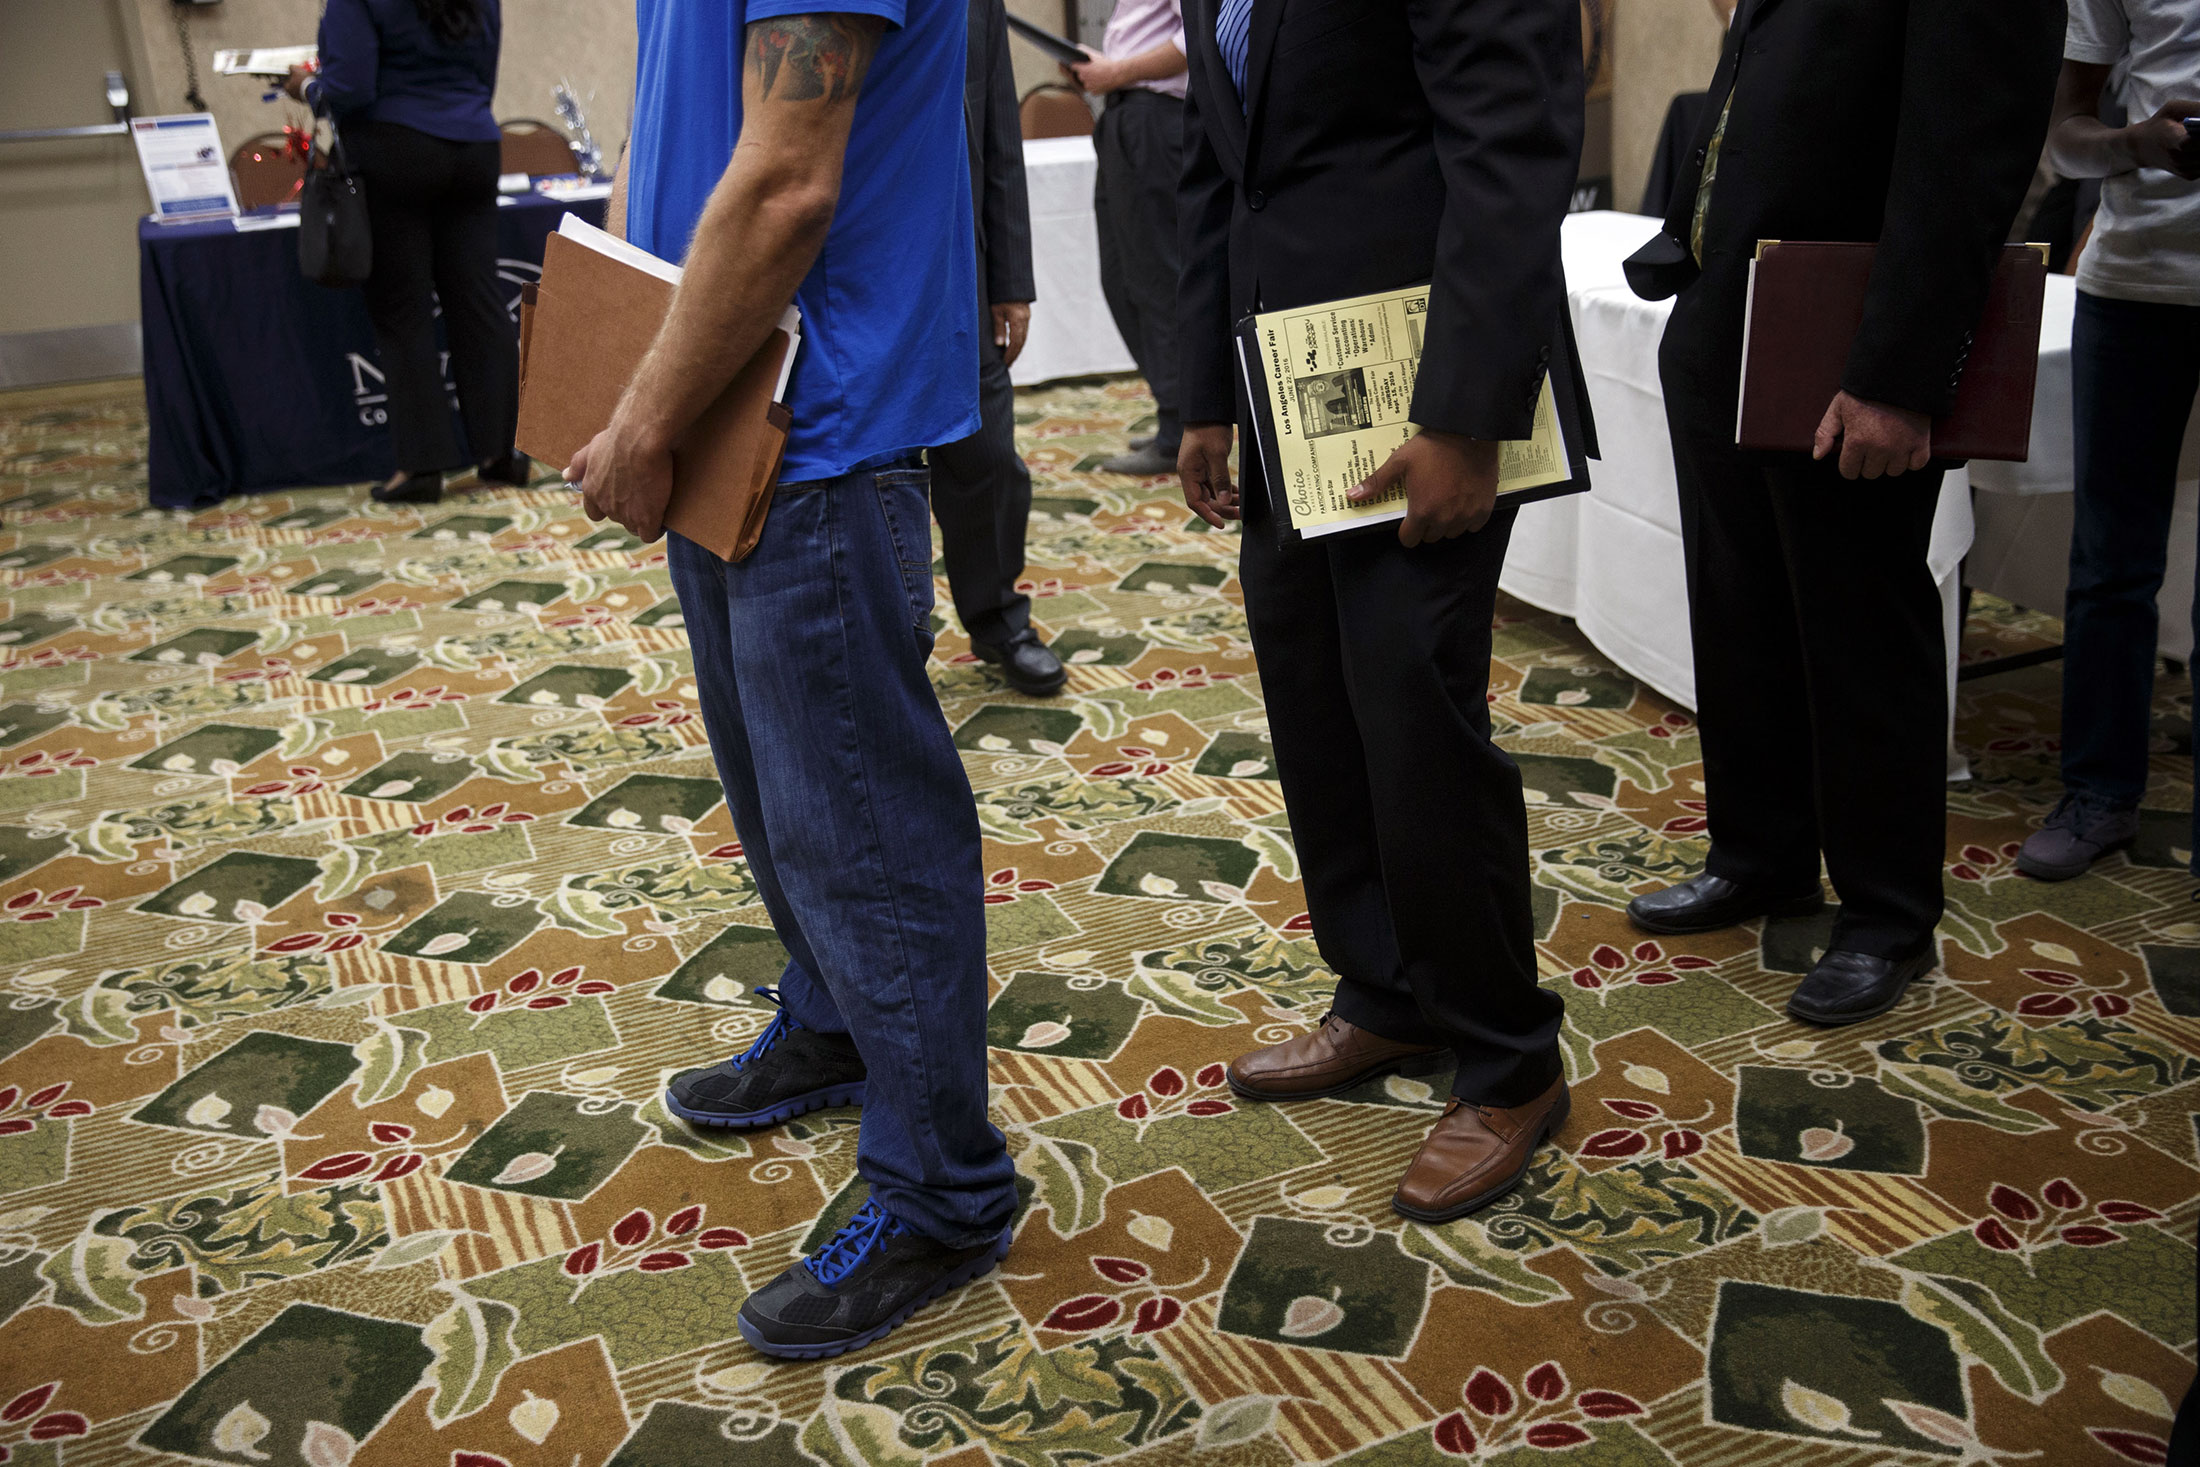 Job seekers wait in line to speak with representatives during a Choice Career Fair in Los Angeles, California, U.S., on Wednesday, June 22, 2016. The U.S. Department of Labor is scheduled to release initial jobless claims figures on June 23.
